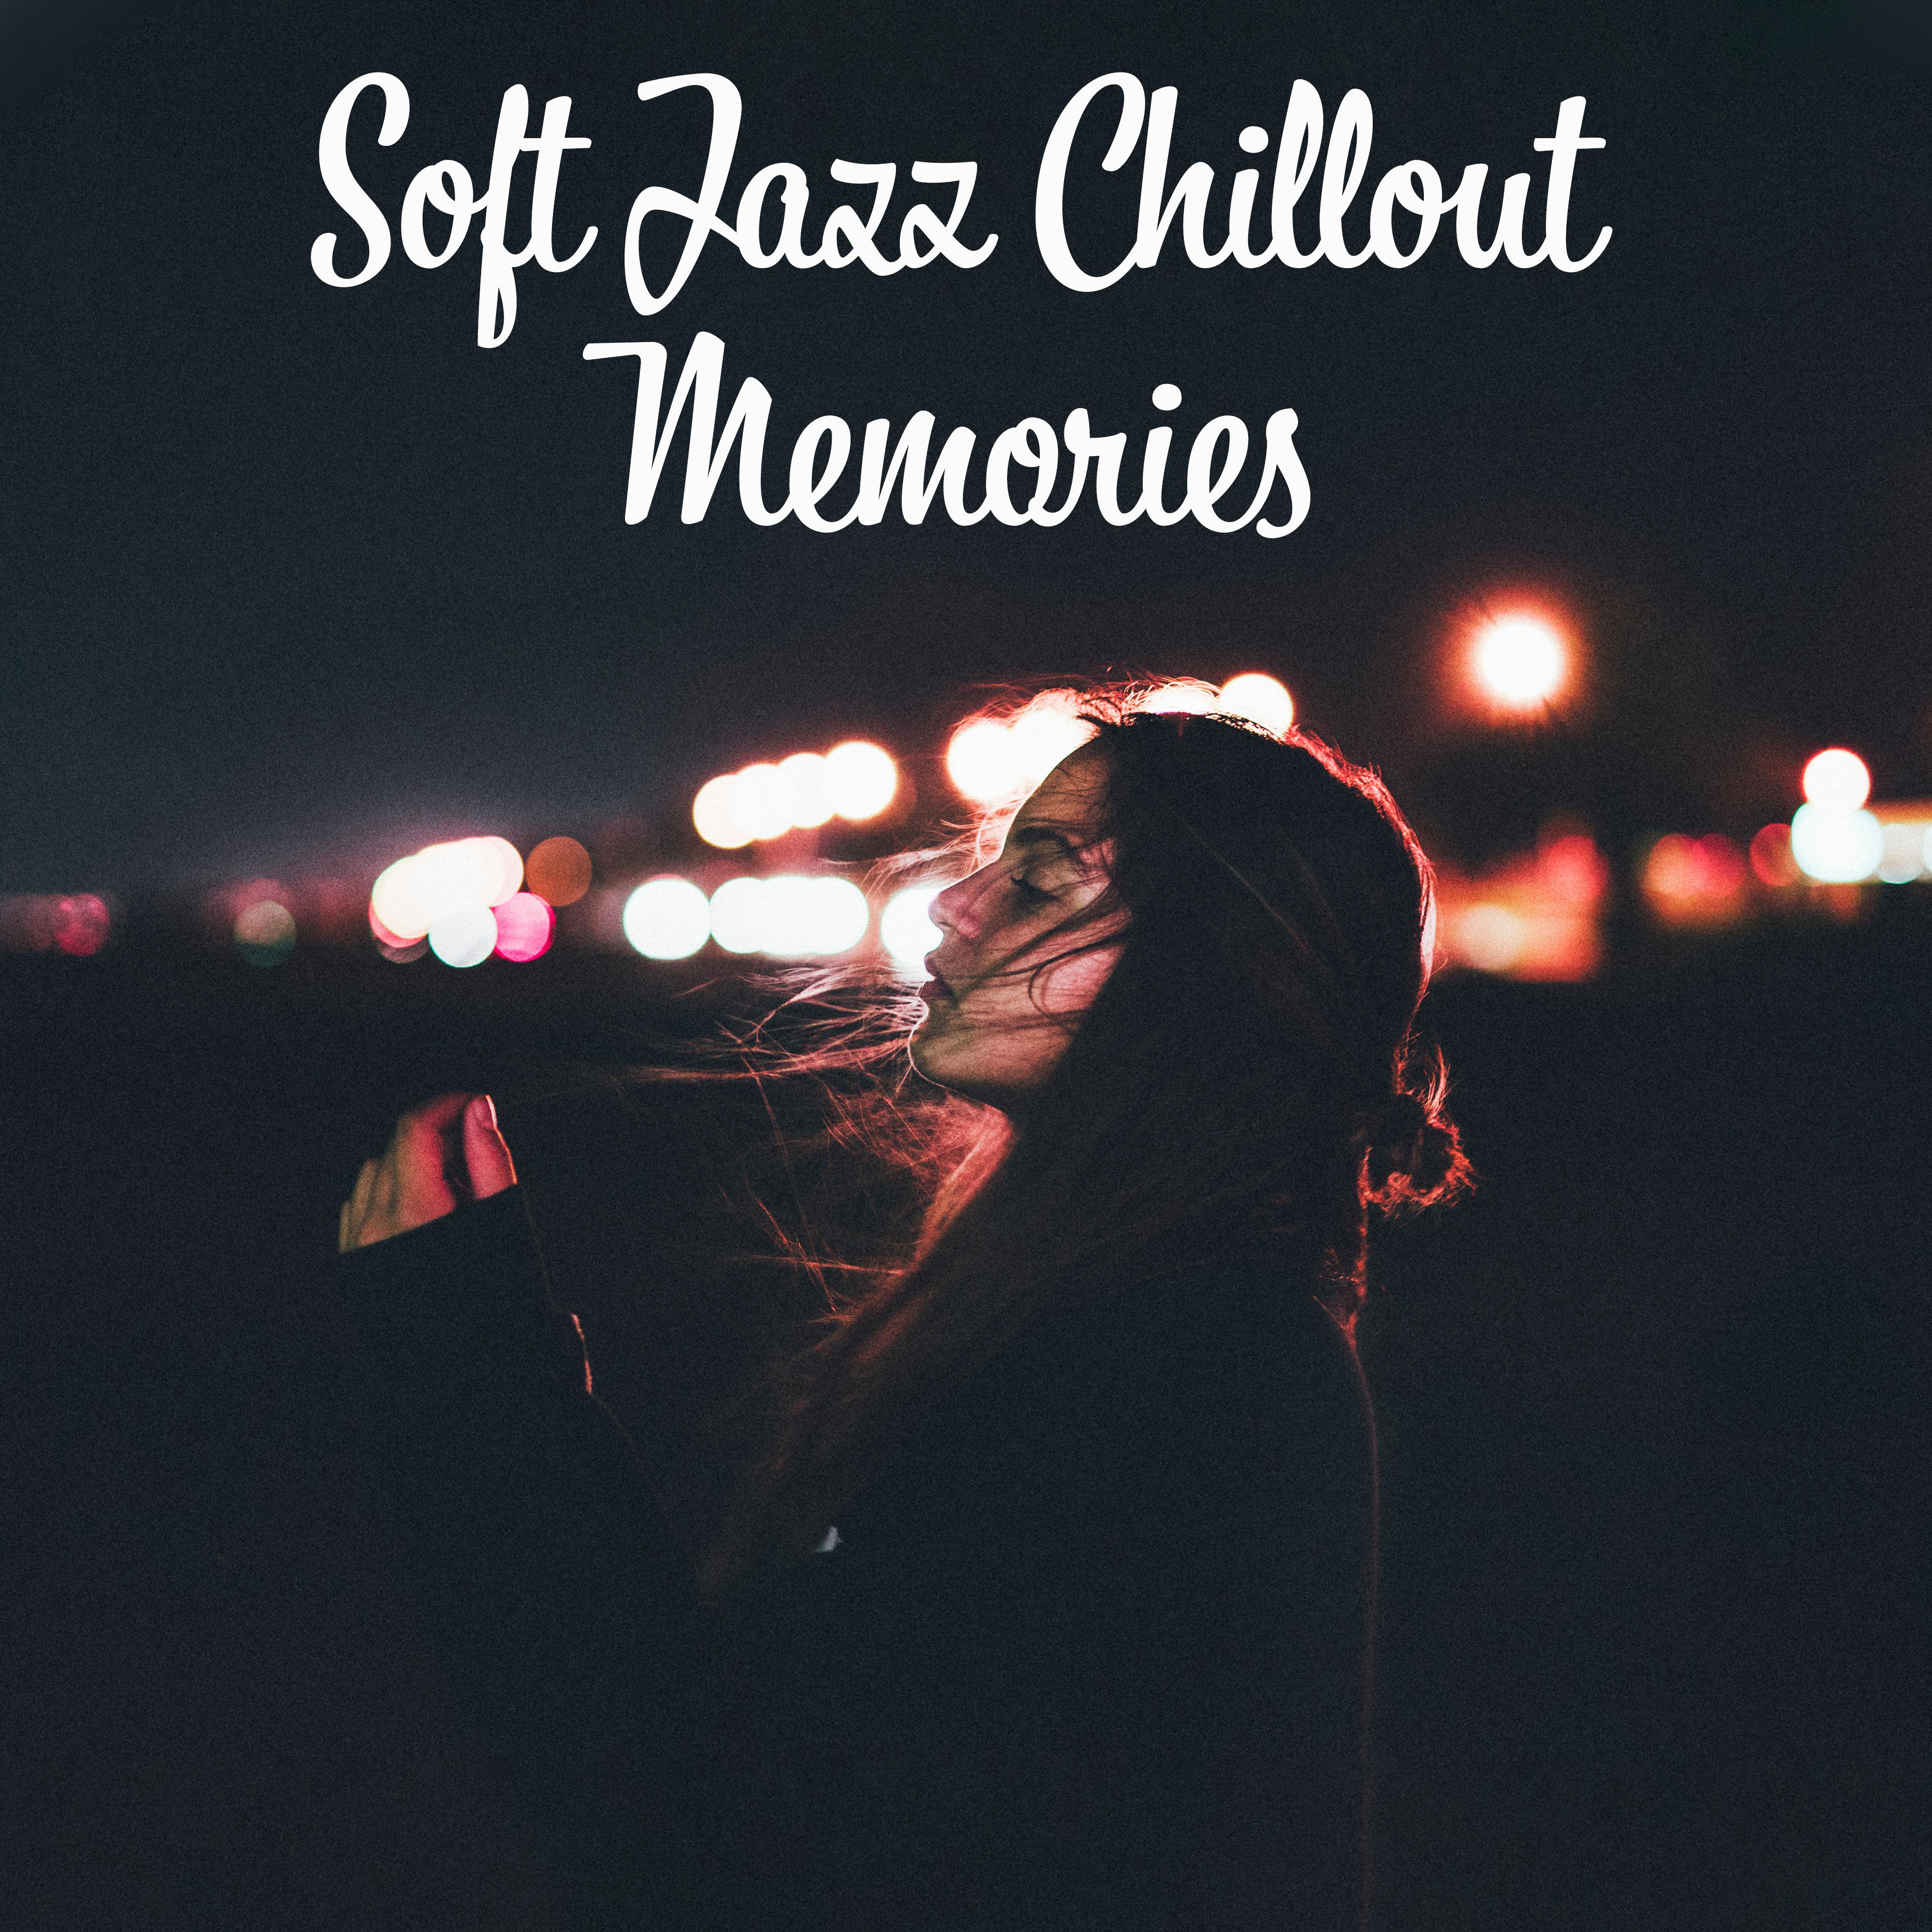 Soft Jazz Chillout Memories – 2019 Smooth Jazz Songs for Nice Time Spending with Family & Friends